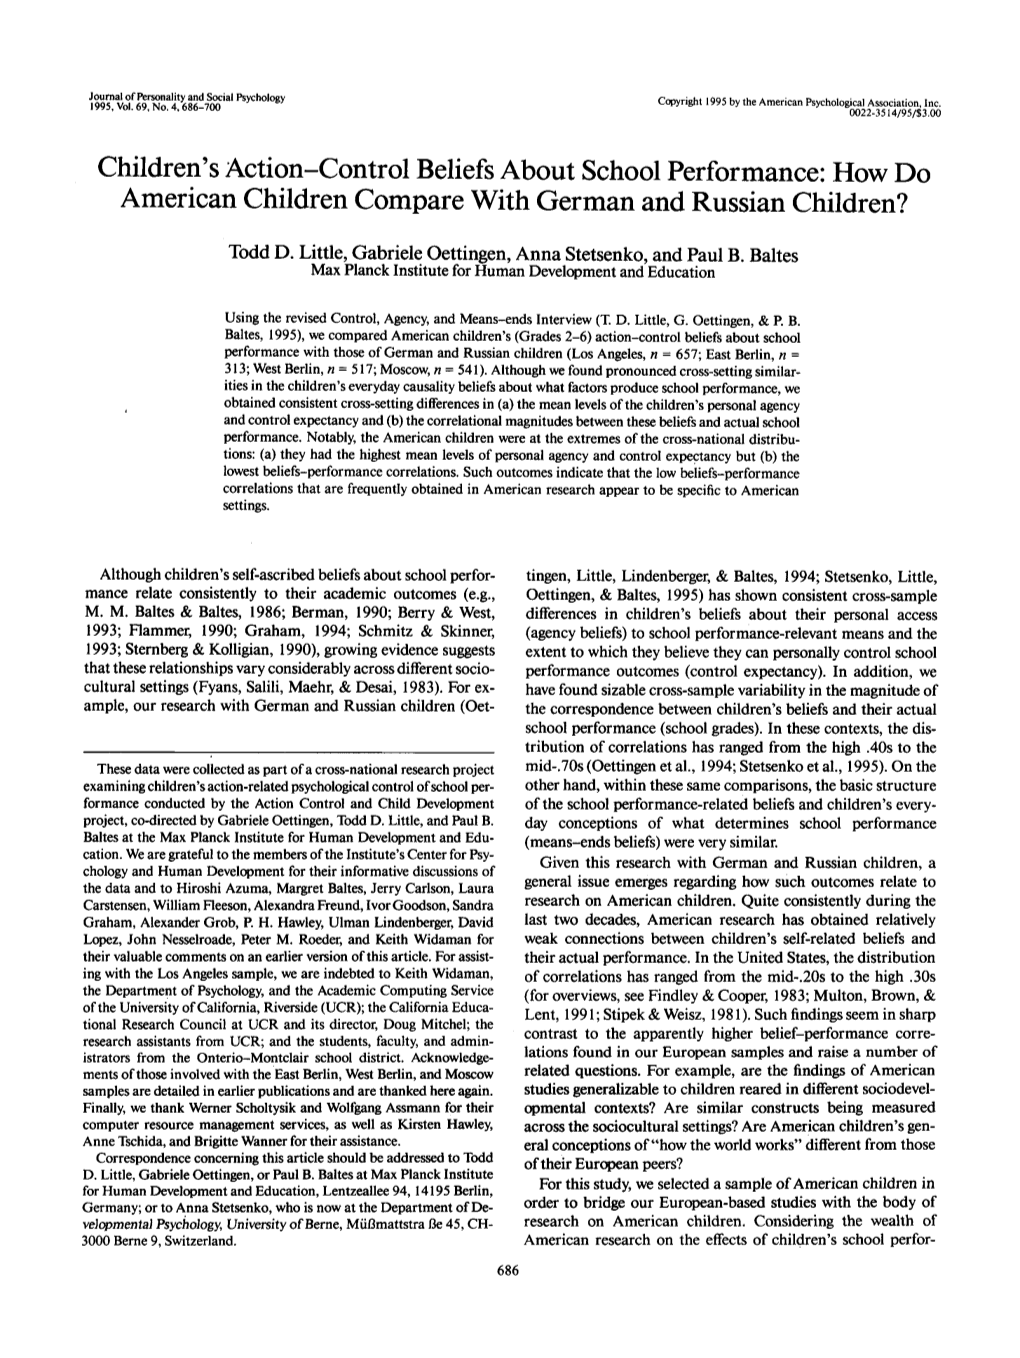 Children's Action-Control Beliefs About School Performance: How Do American Children Compare with German and Russian Children?